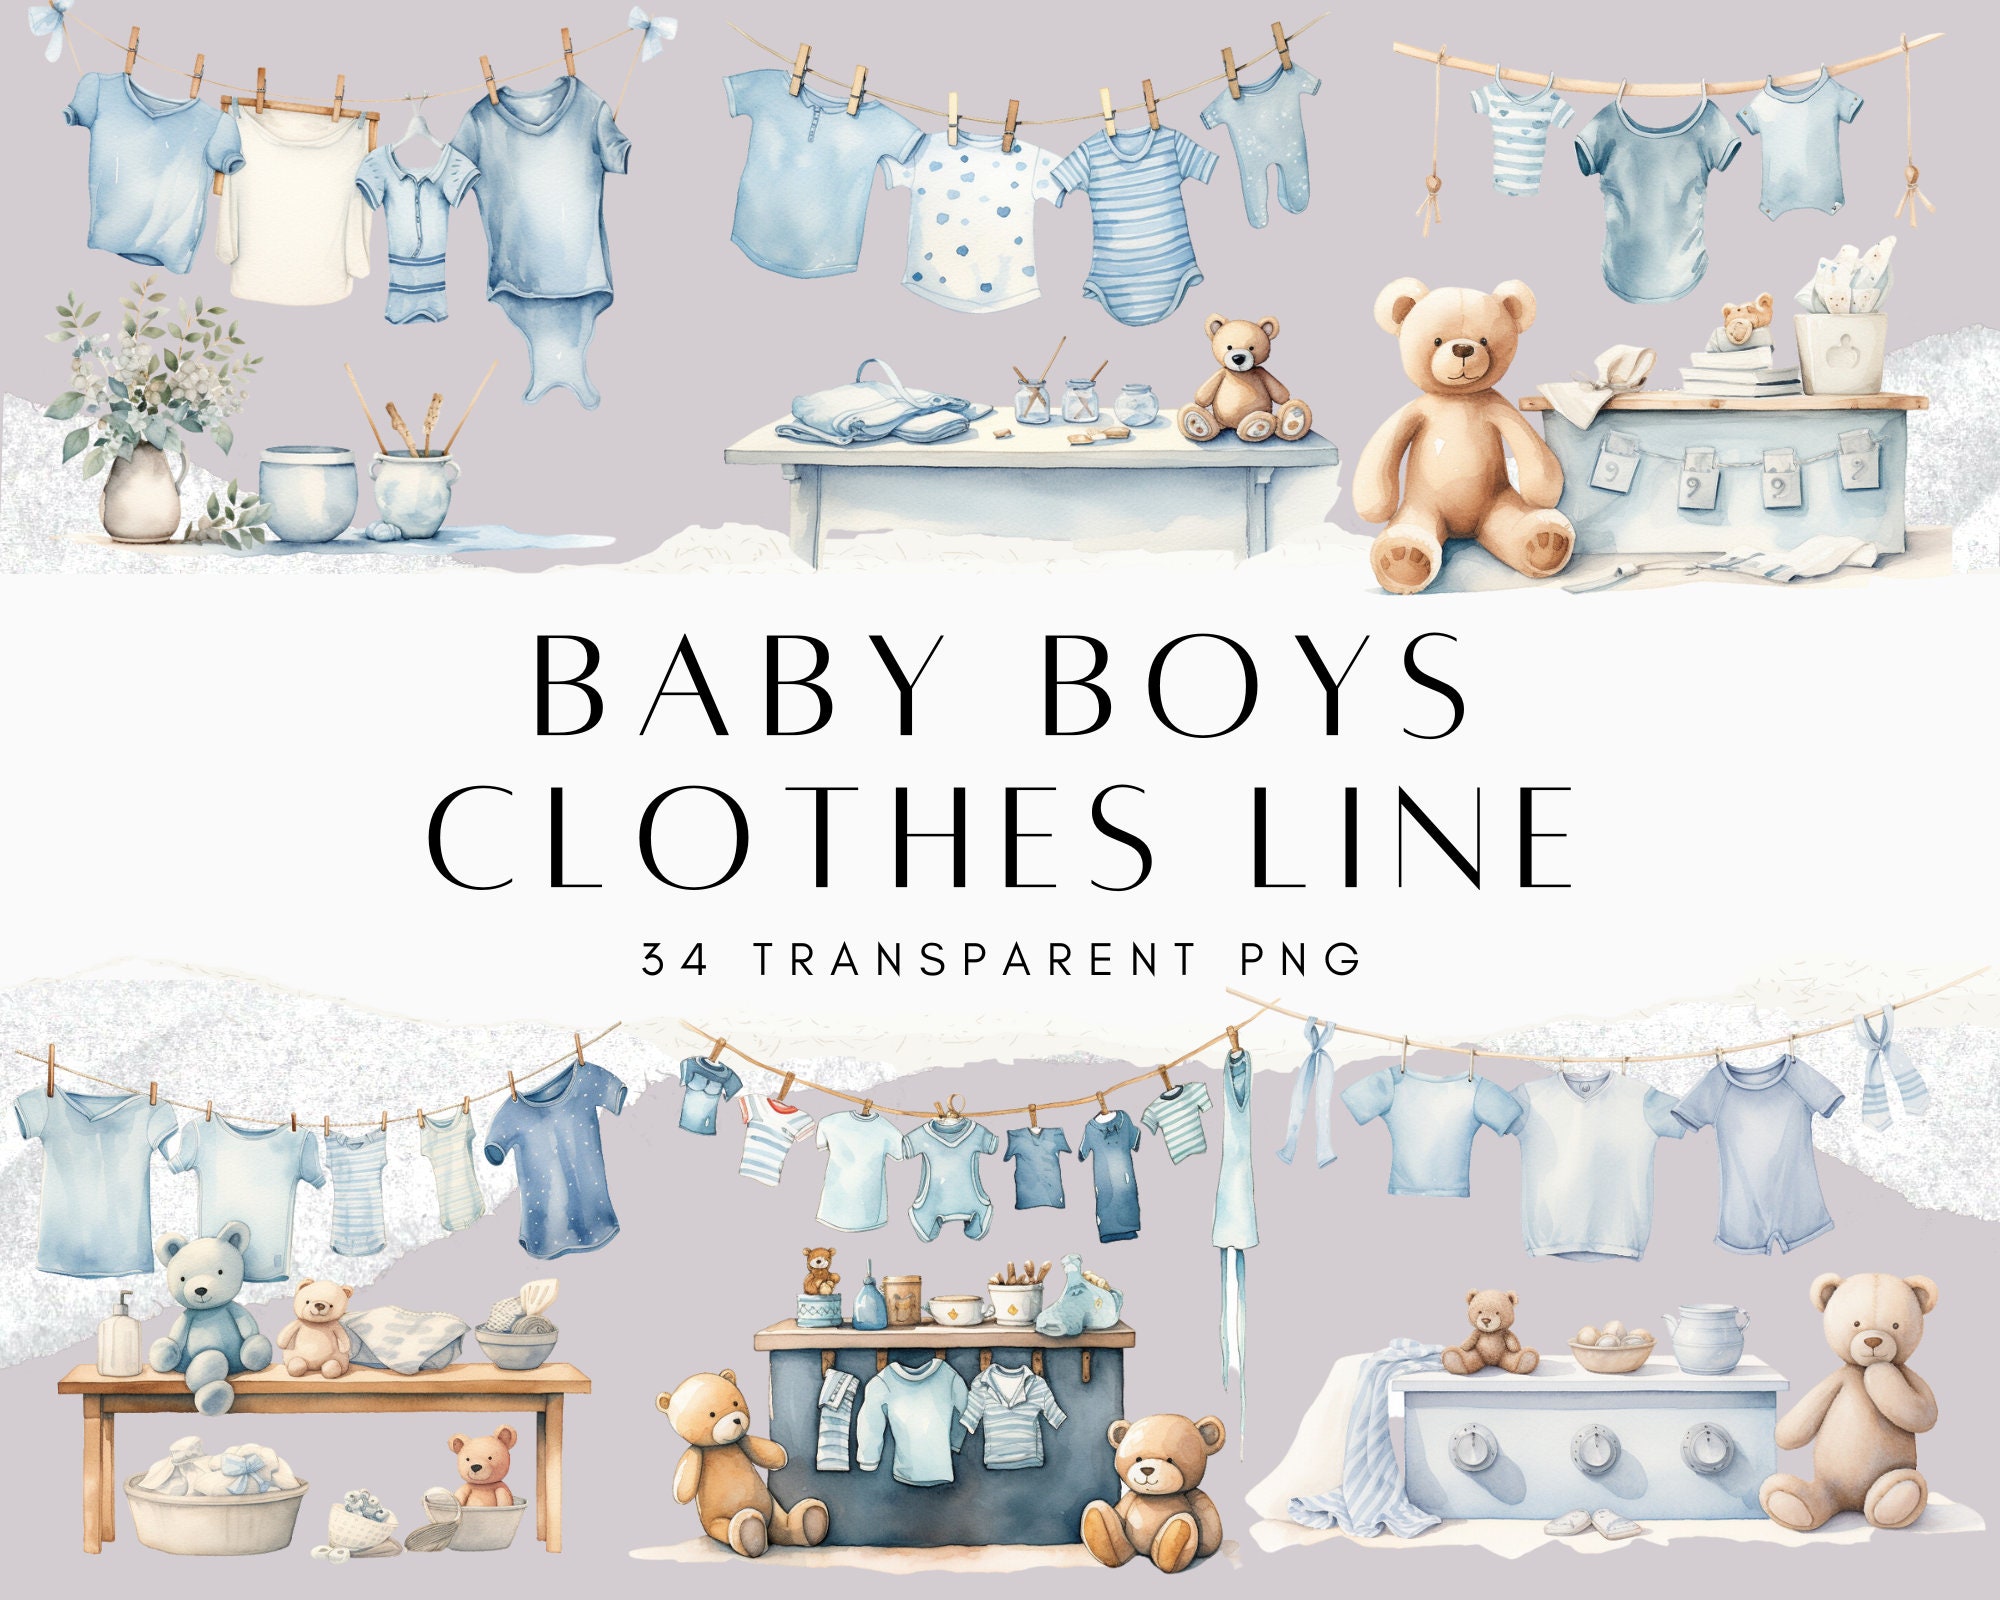 Baby Clothes Hanging Clipart Transparent PNG Hd, Cute Baby Clothes Hanging  On The Rope, Baby Shower, Fashion, Cute PNG Image For Free Download